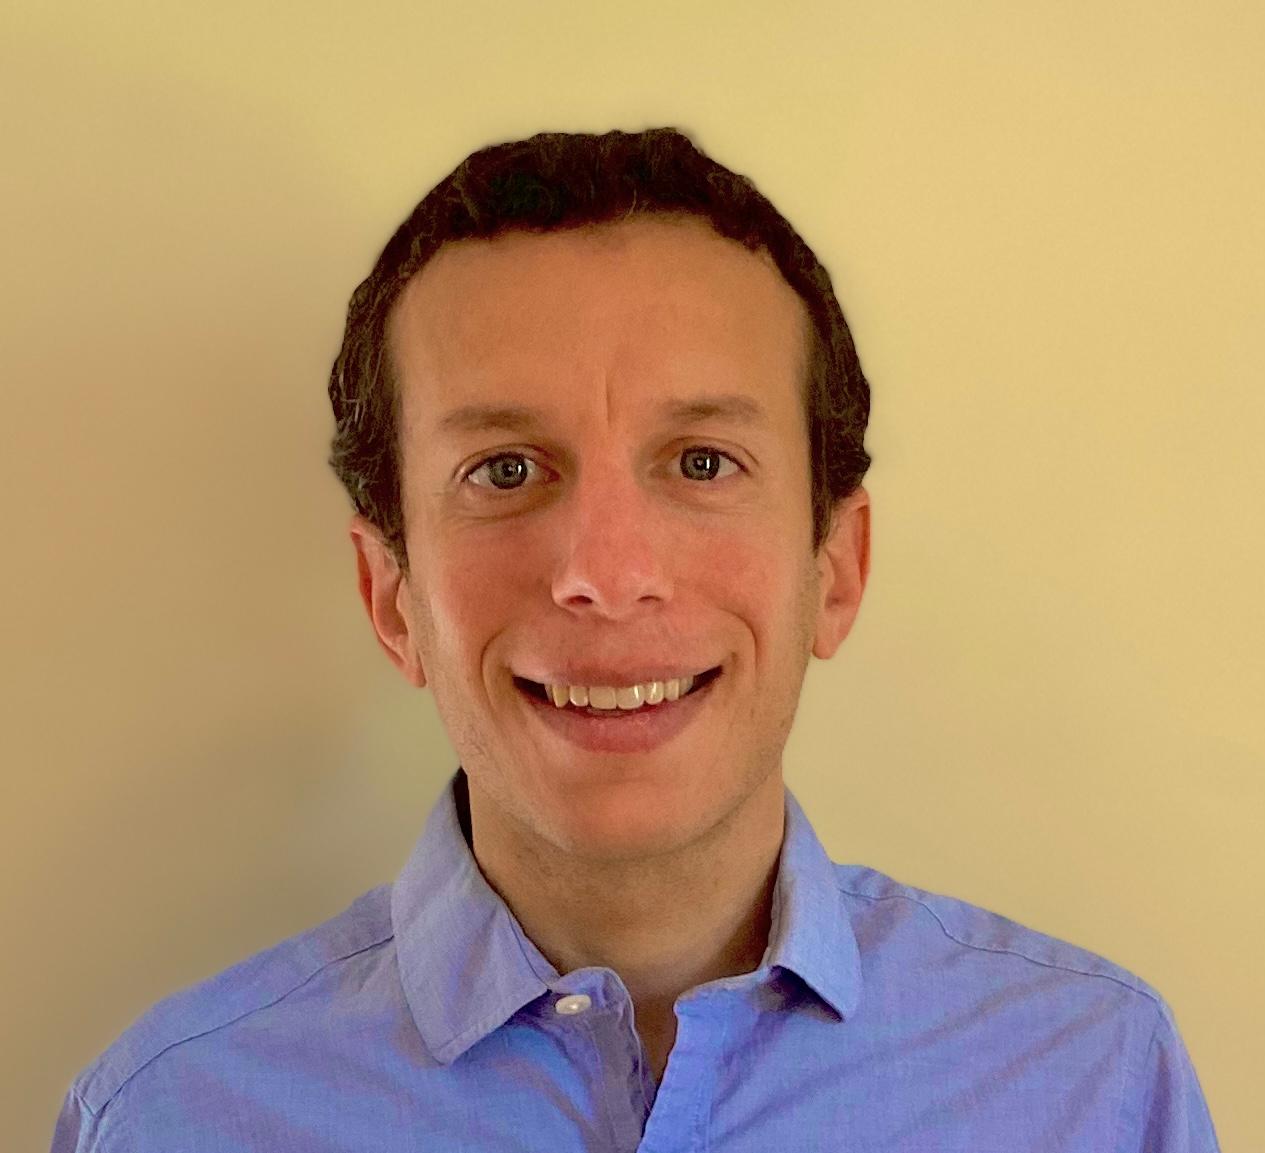 An image of Jonathan Wolff, a doctoral student in a blue oxford shirt with short brown hair.